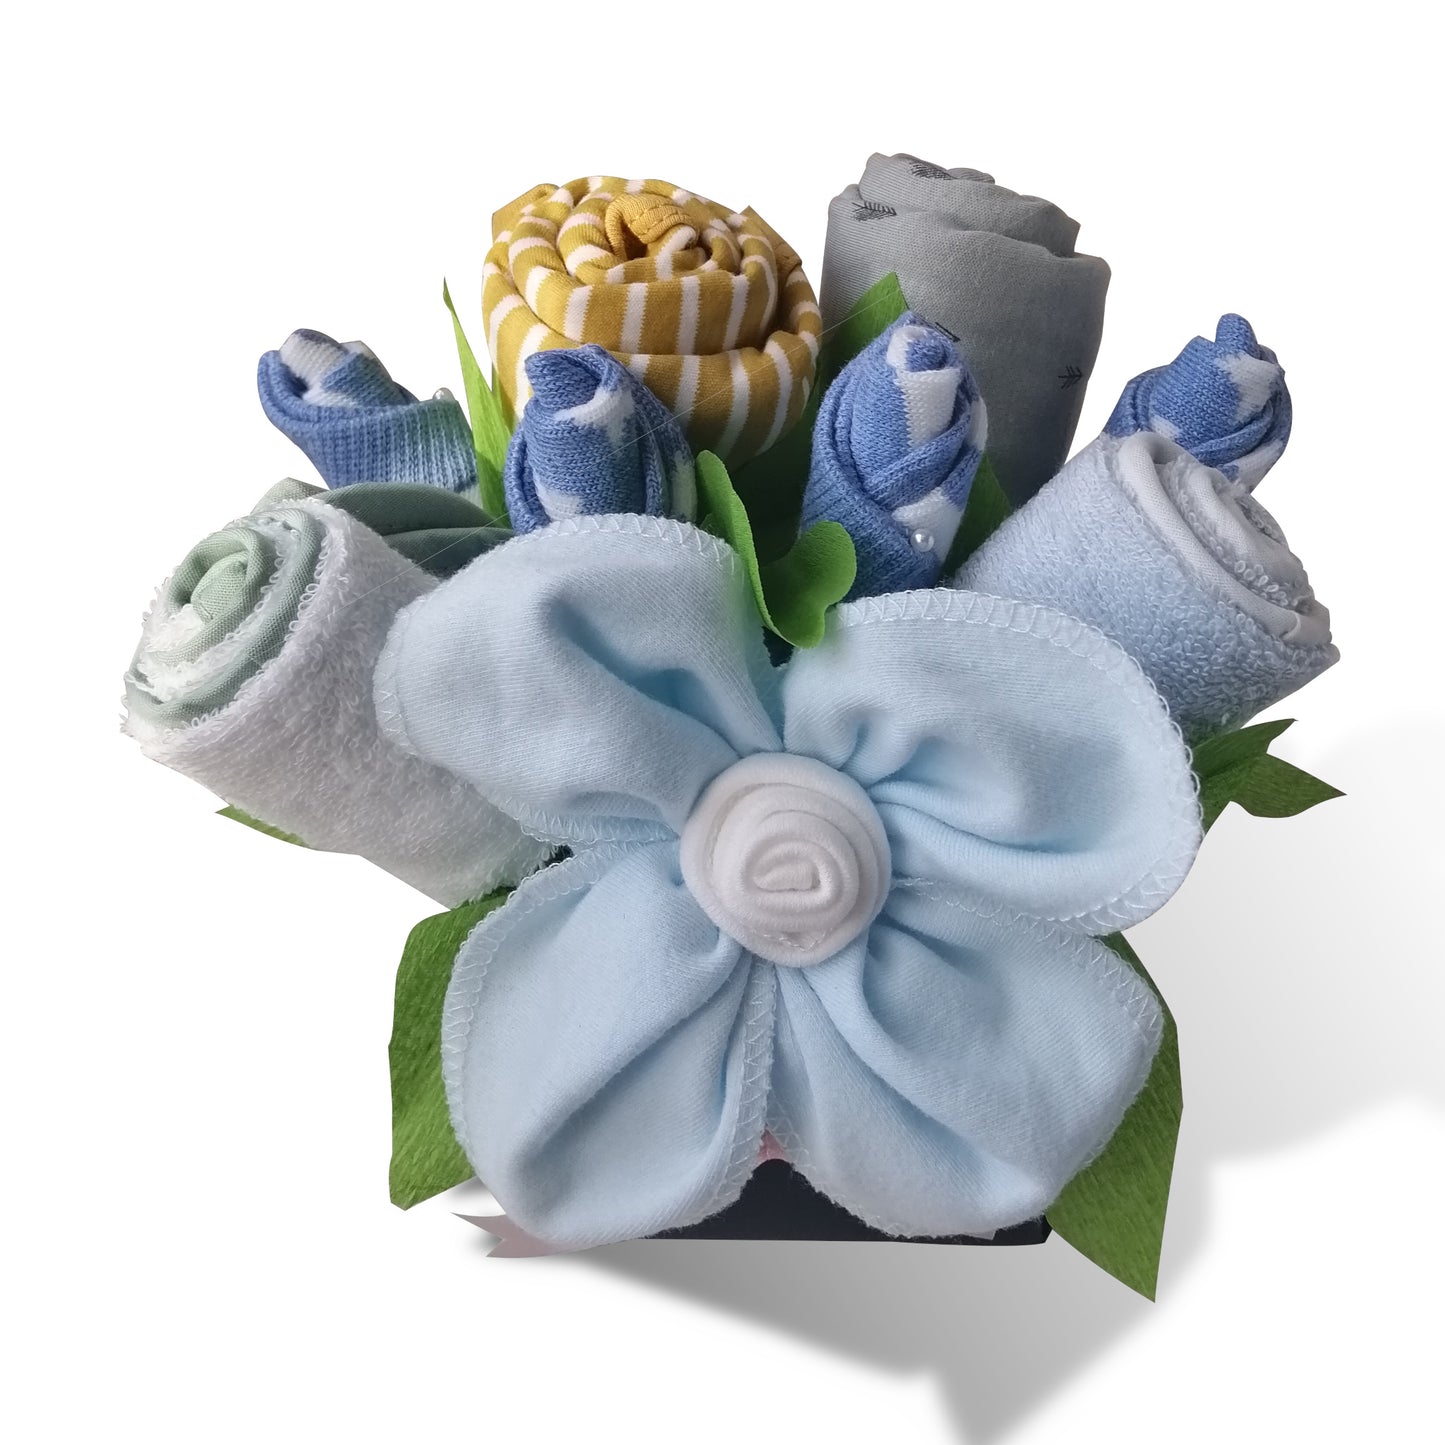 Construction At Work Baby Boy Gift Bouquet / Basket